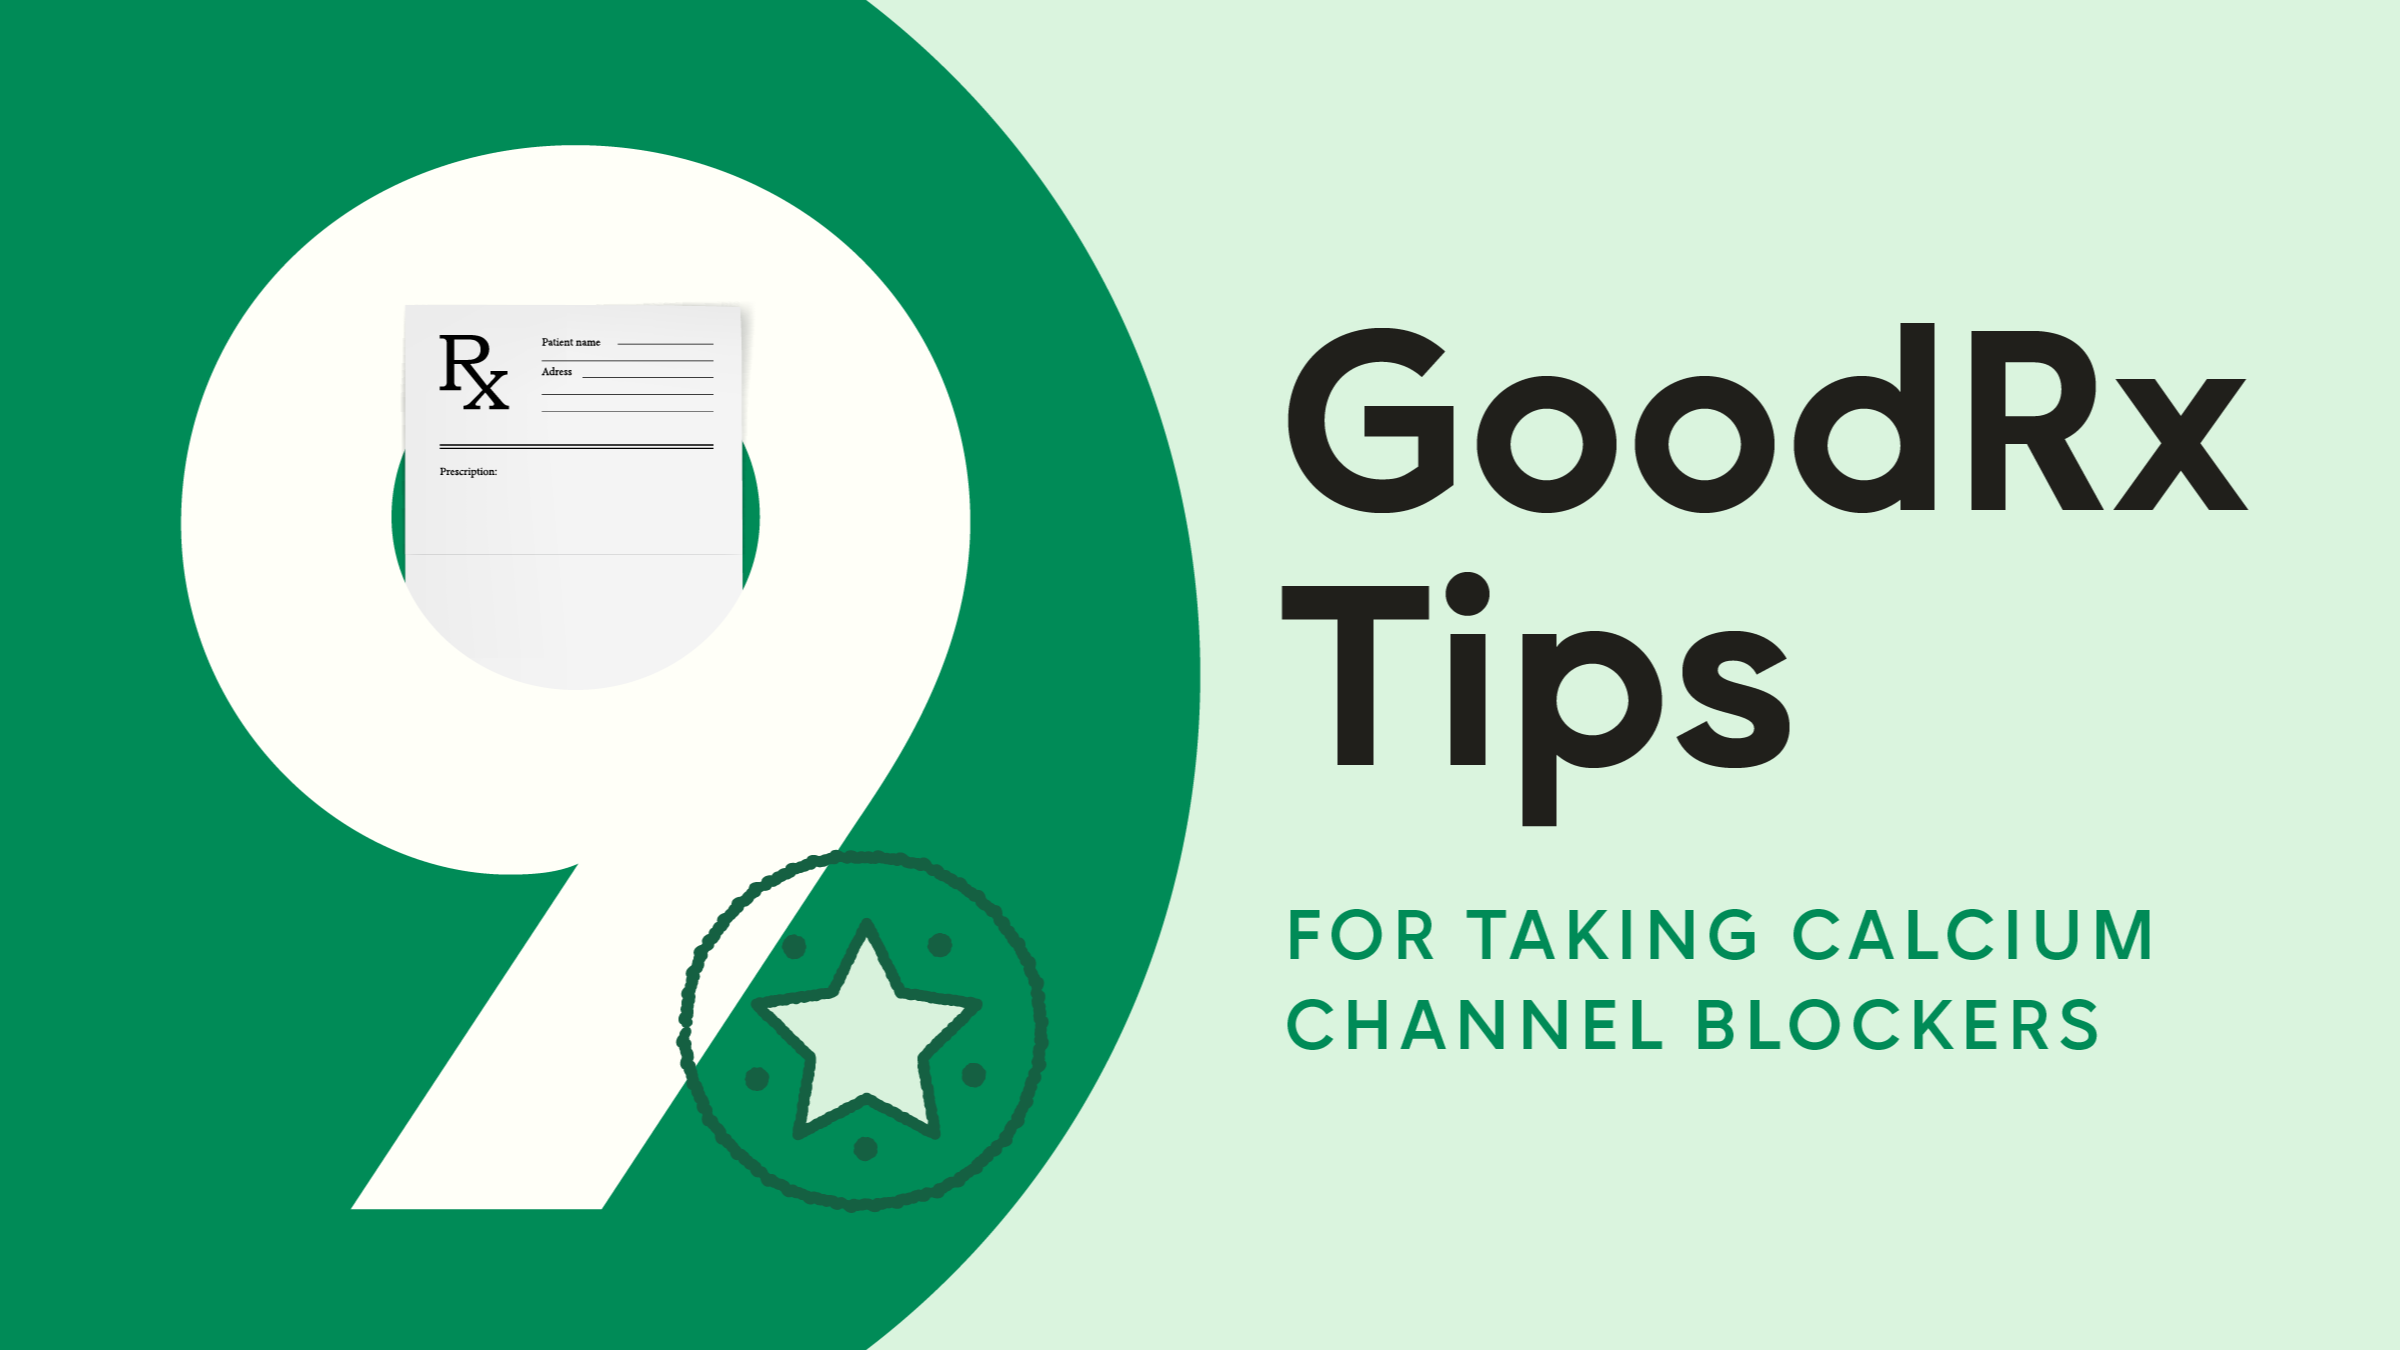 9 Essential Tips for Taking Calcium Channel Blockers - GoodRx